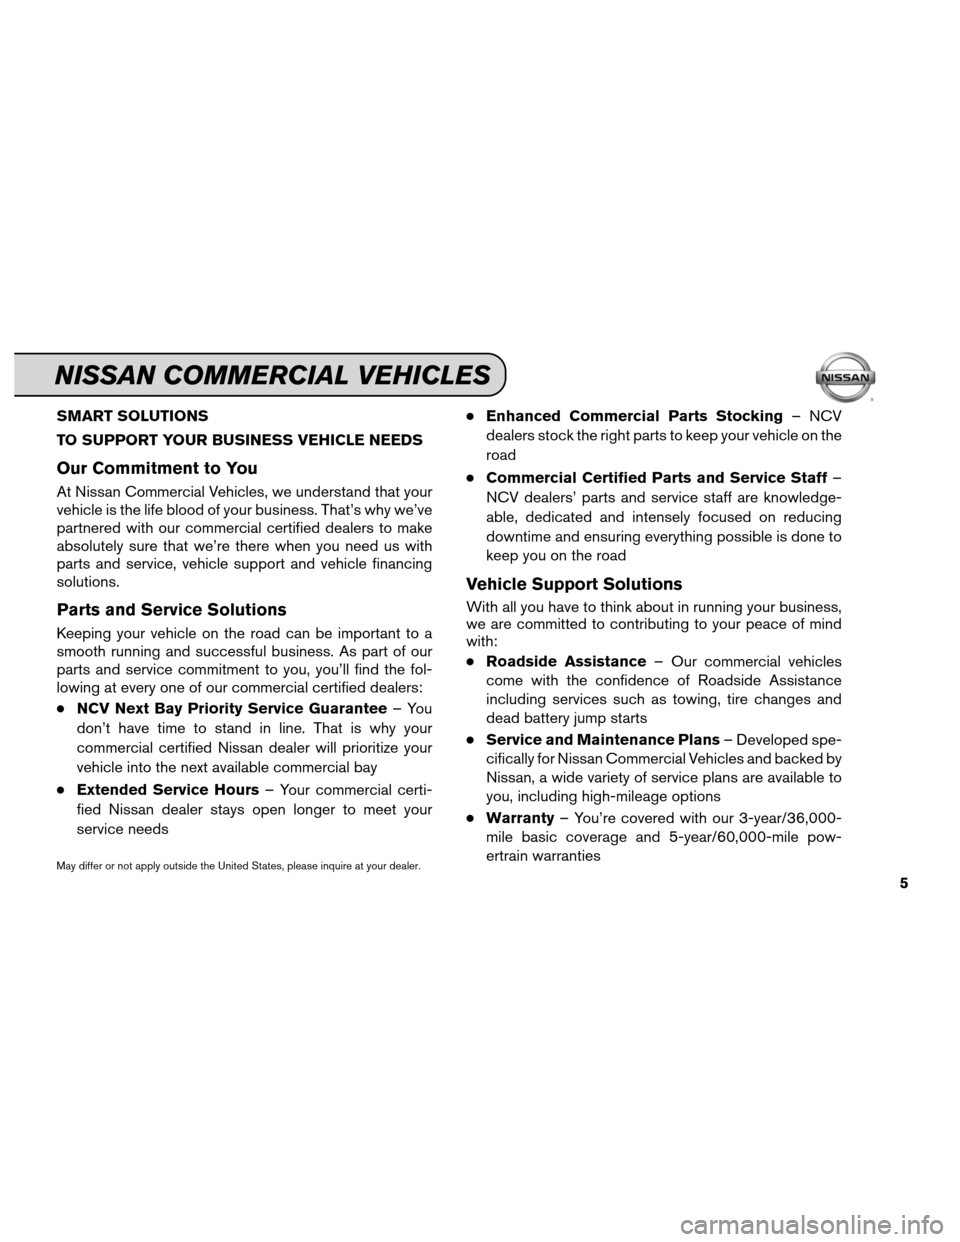 NISSAN MAXIMA 2012 A35 / 7.G Service And Maintenance Guide SMART SOLUTIONS
TO SUPPORT YOUR BUSINESS VEHICLE NEEDS
Our Commitment to You
At Nissan Commercial Vehicles, we understand that your
vehicle is the life blood of your business. That’s why we’ve
par